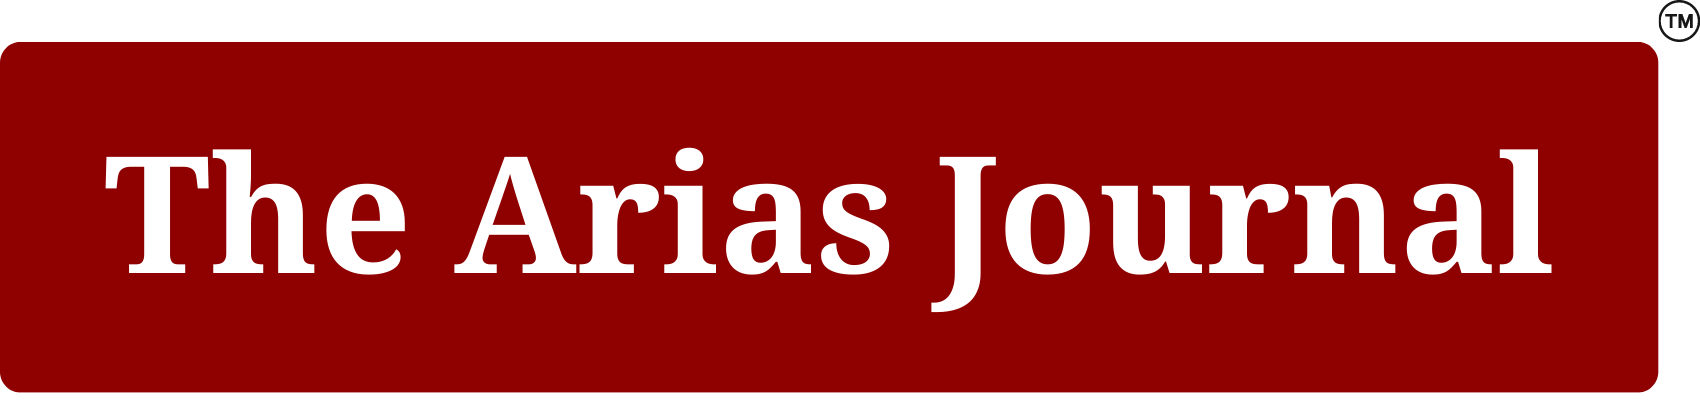 The Arias Journal